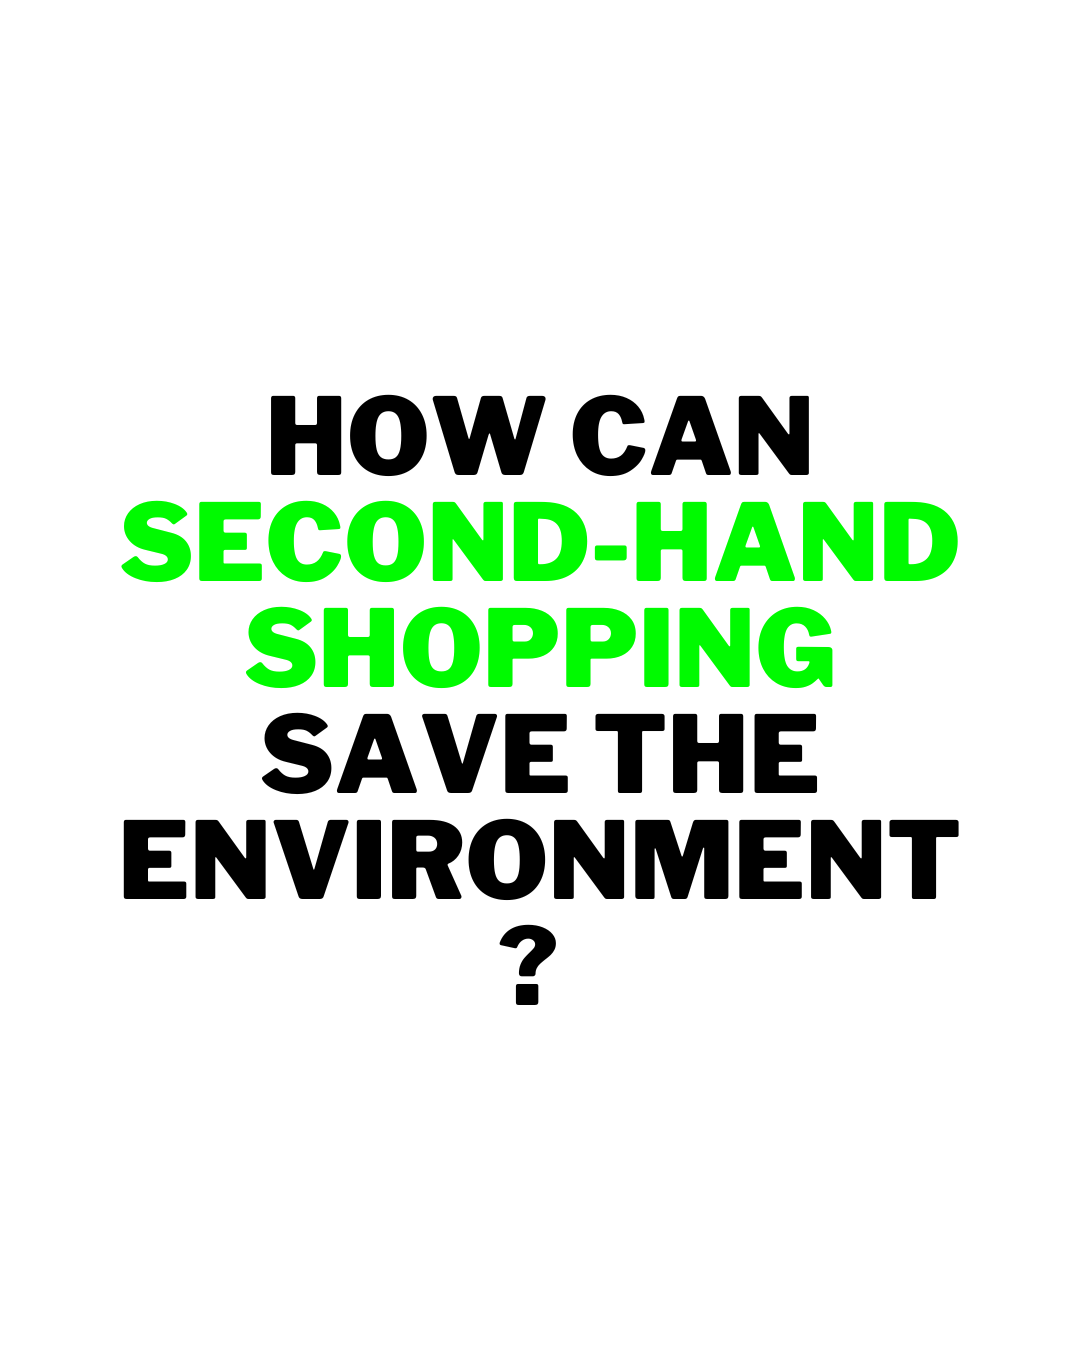 eco-neotextile-blog-save-the-enviroment-with-second hand-shopping-text-photo